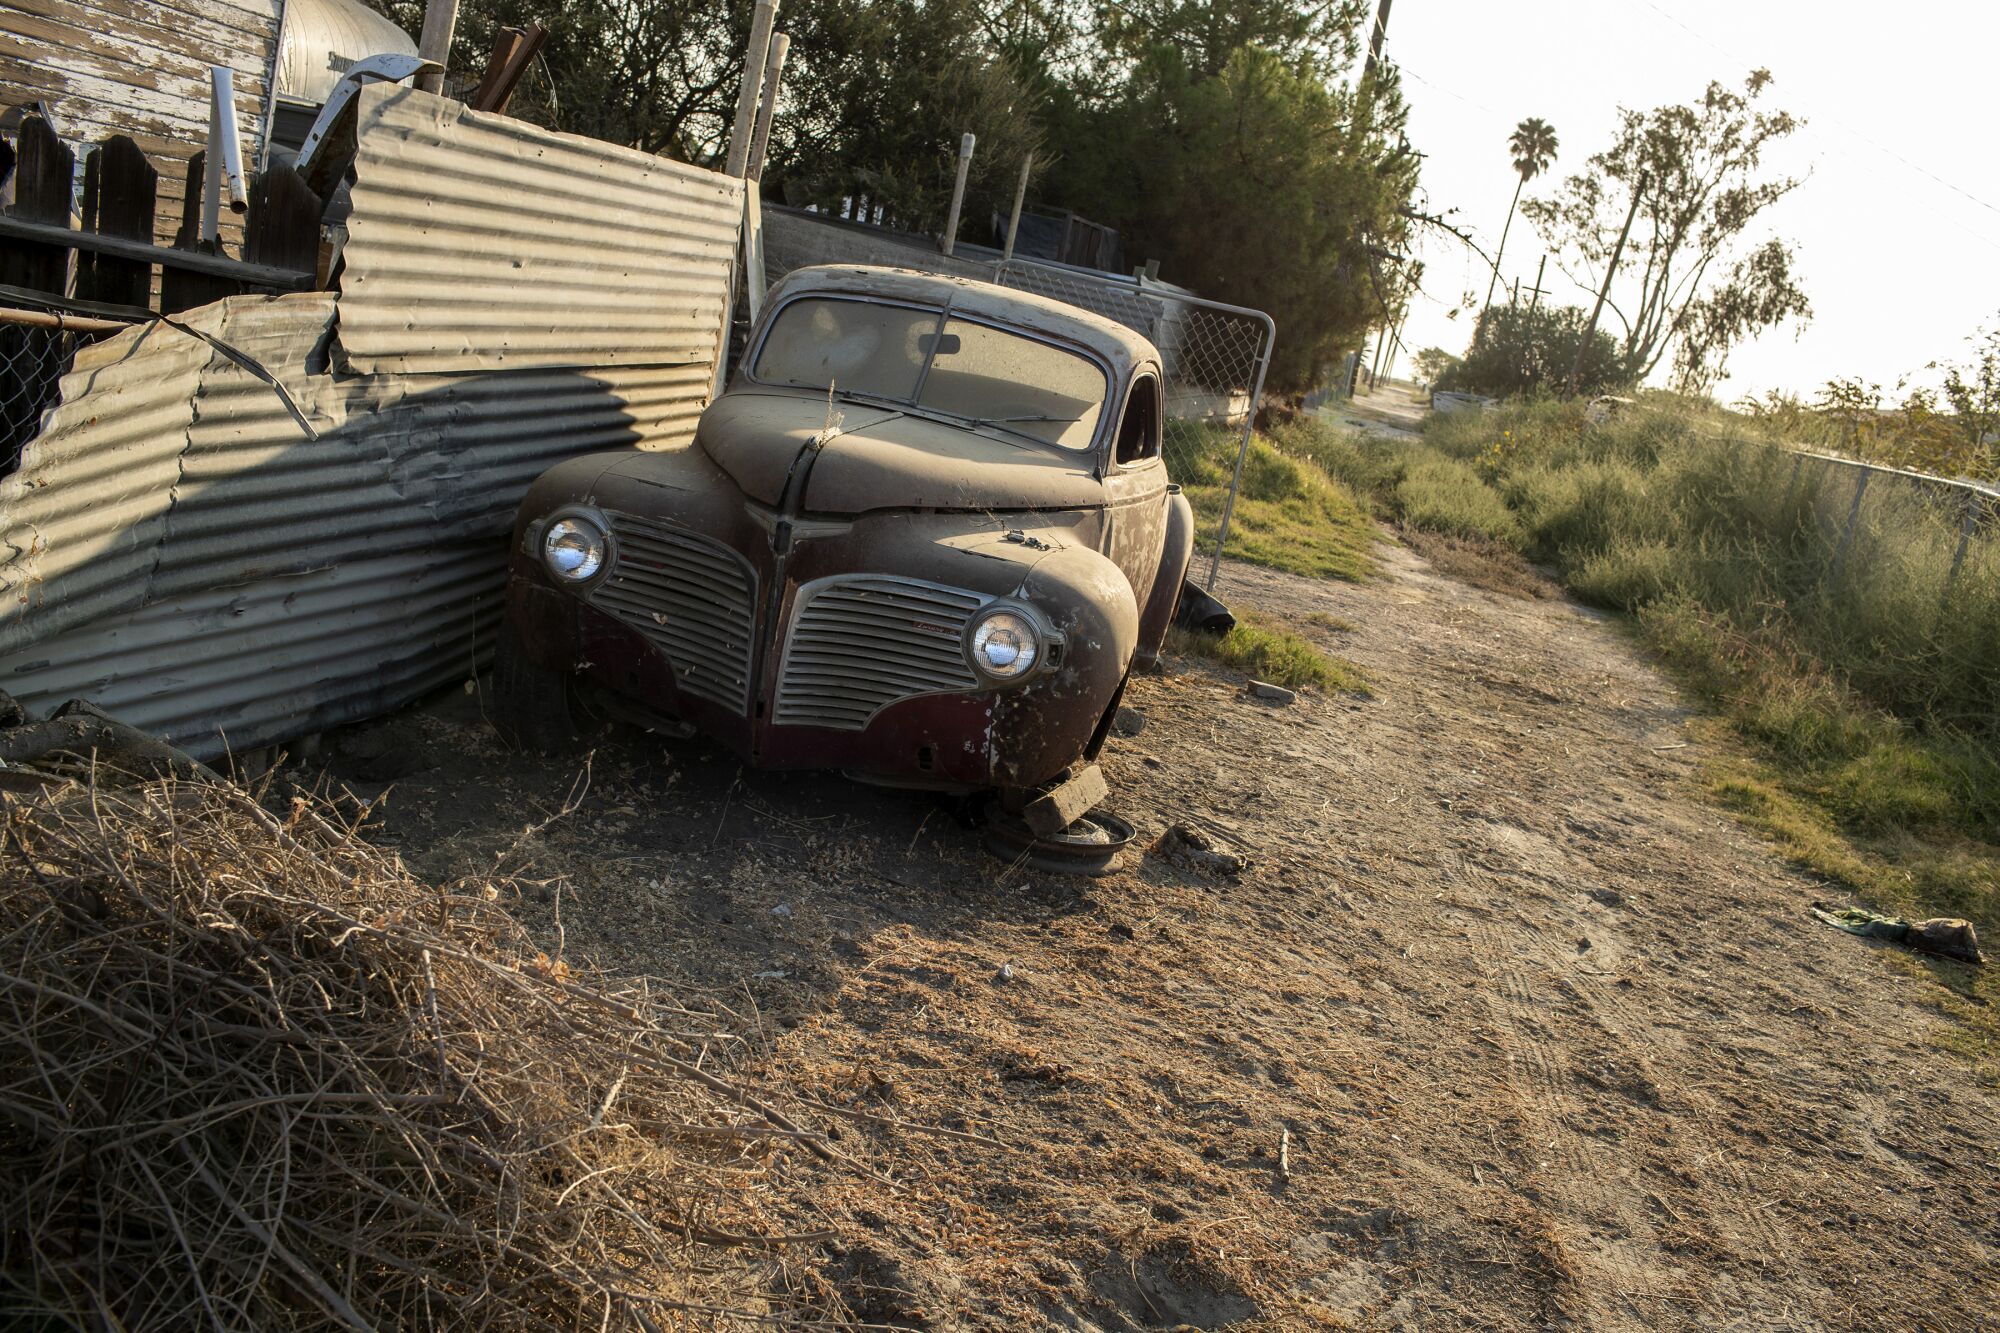 A vintage automobile sits on blocks in a dusty alley.